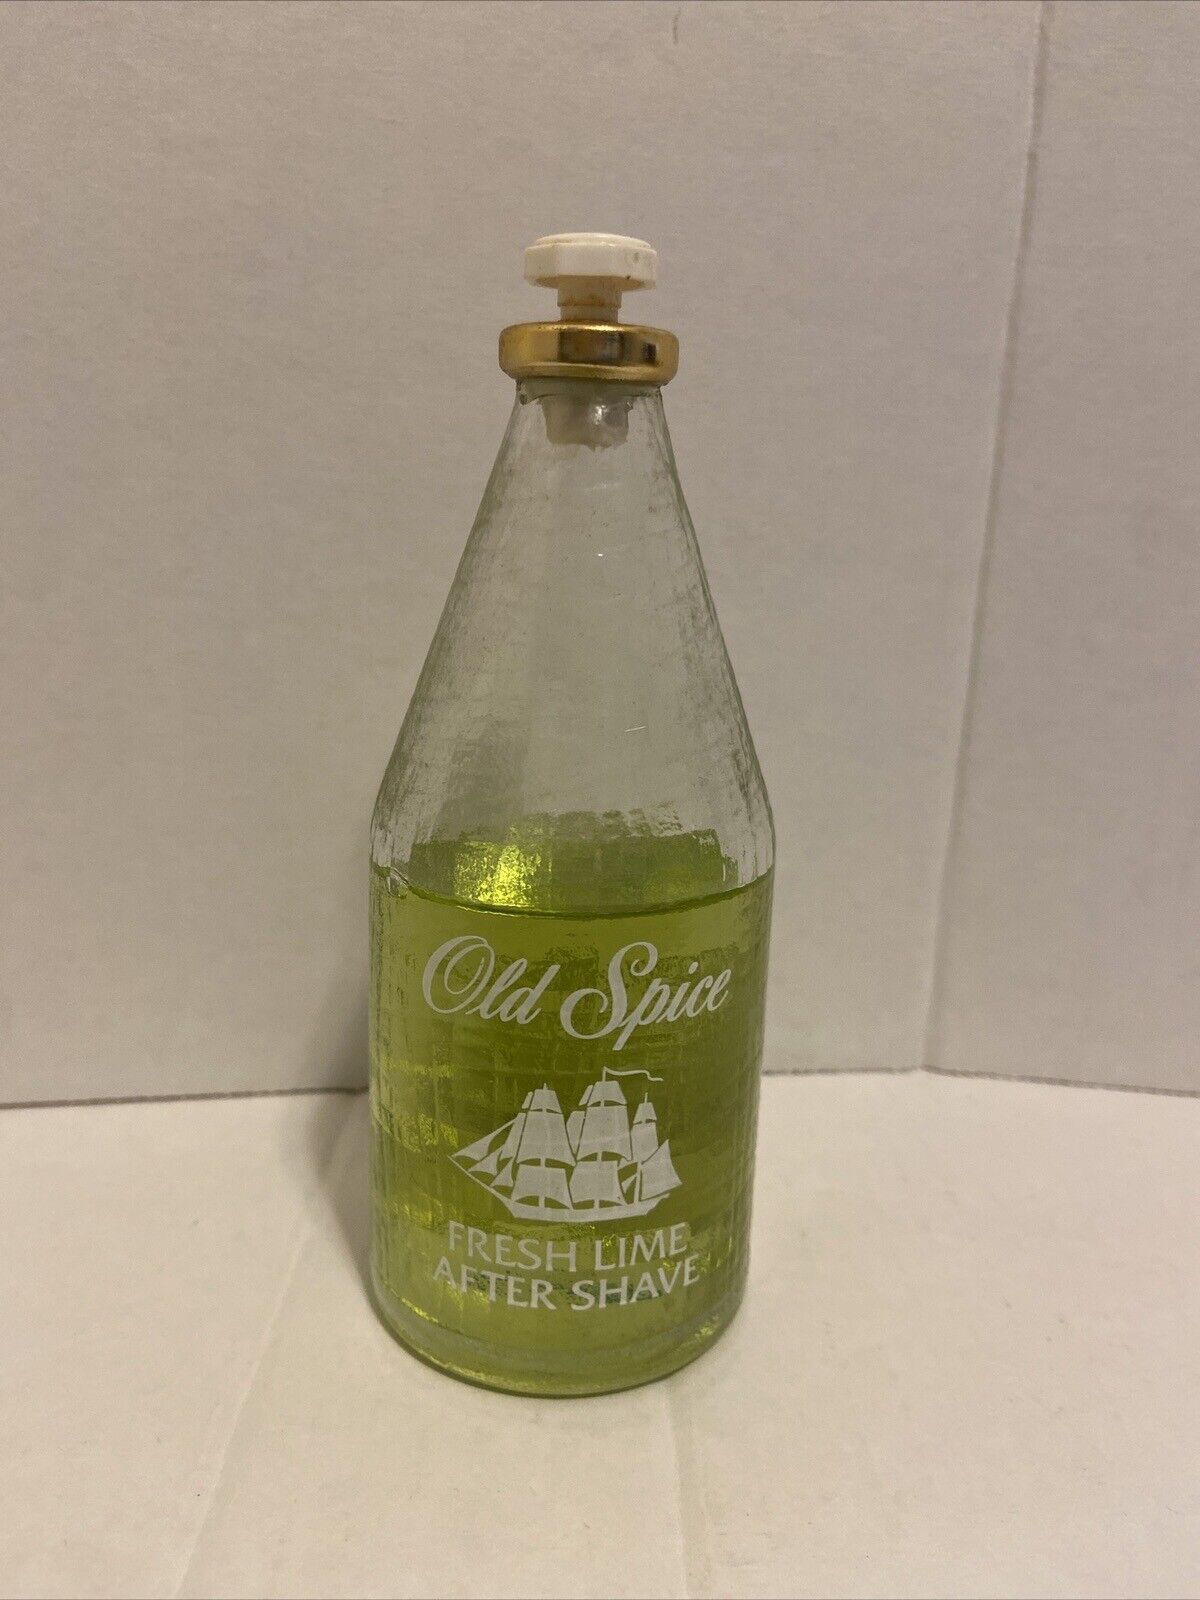 OLD SPICE LIME AFTER SHAVE 4 1/4 OZ. SHULTON, INC